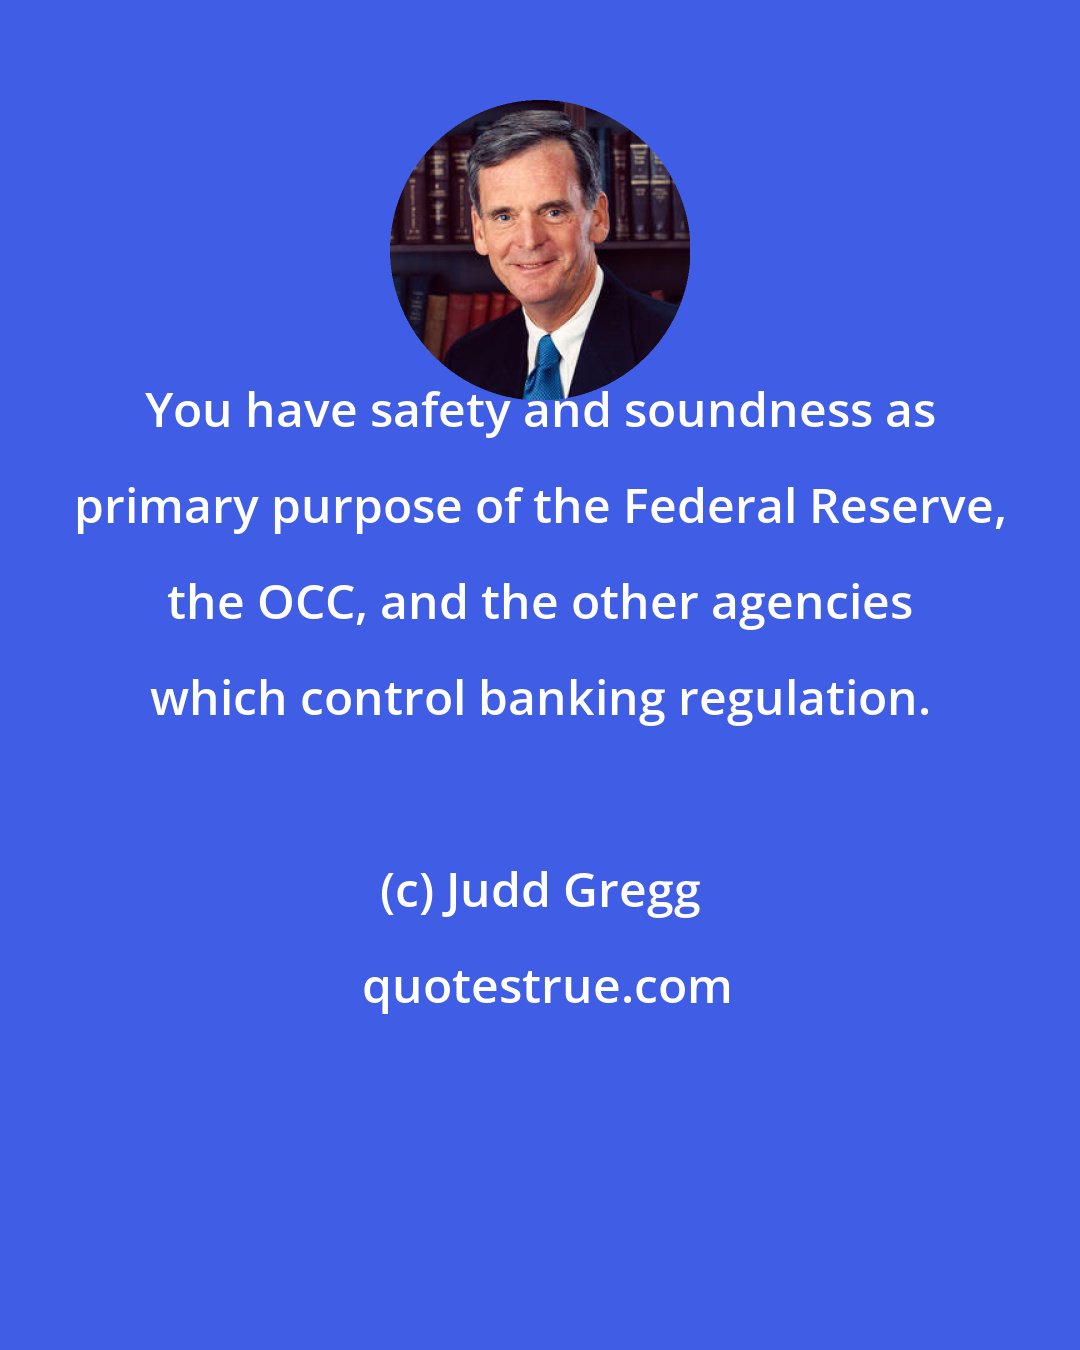 Judd Gregg: You have safety and soundness as primary purpose of the Federal Reserve, the OCC, and the other agencies which control banking regulation.